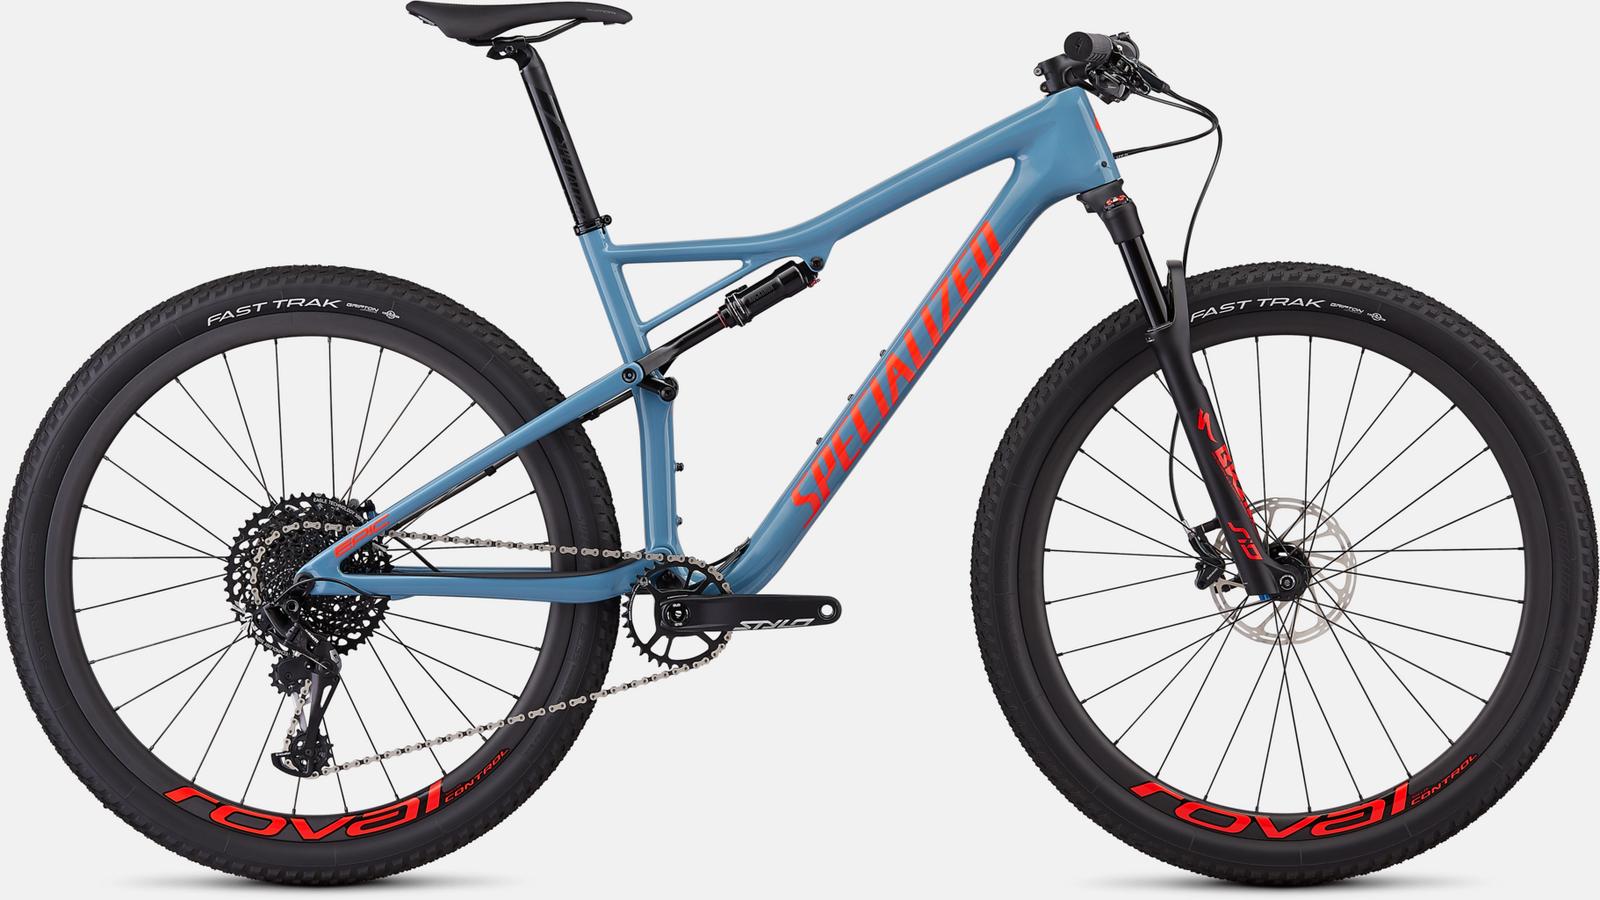 Paint for 2019 Specialized Men's Epic Expert - Gloss Storm Grey